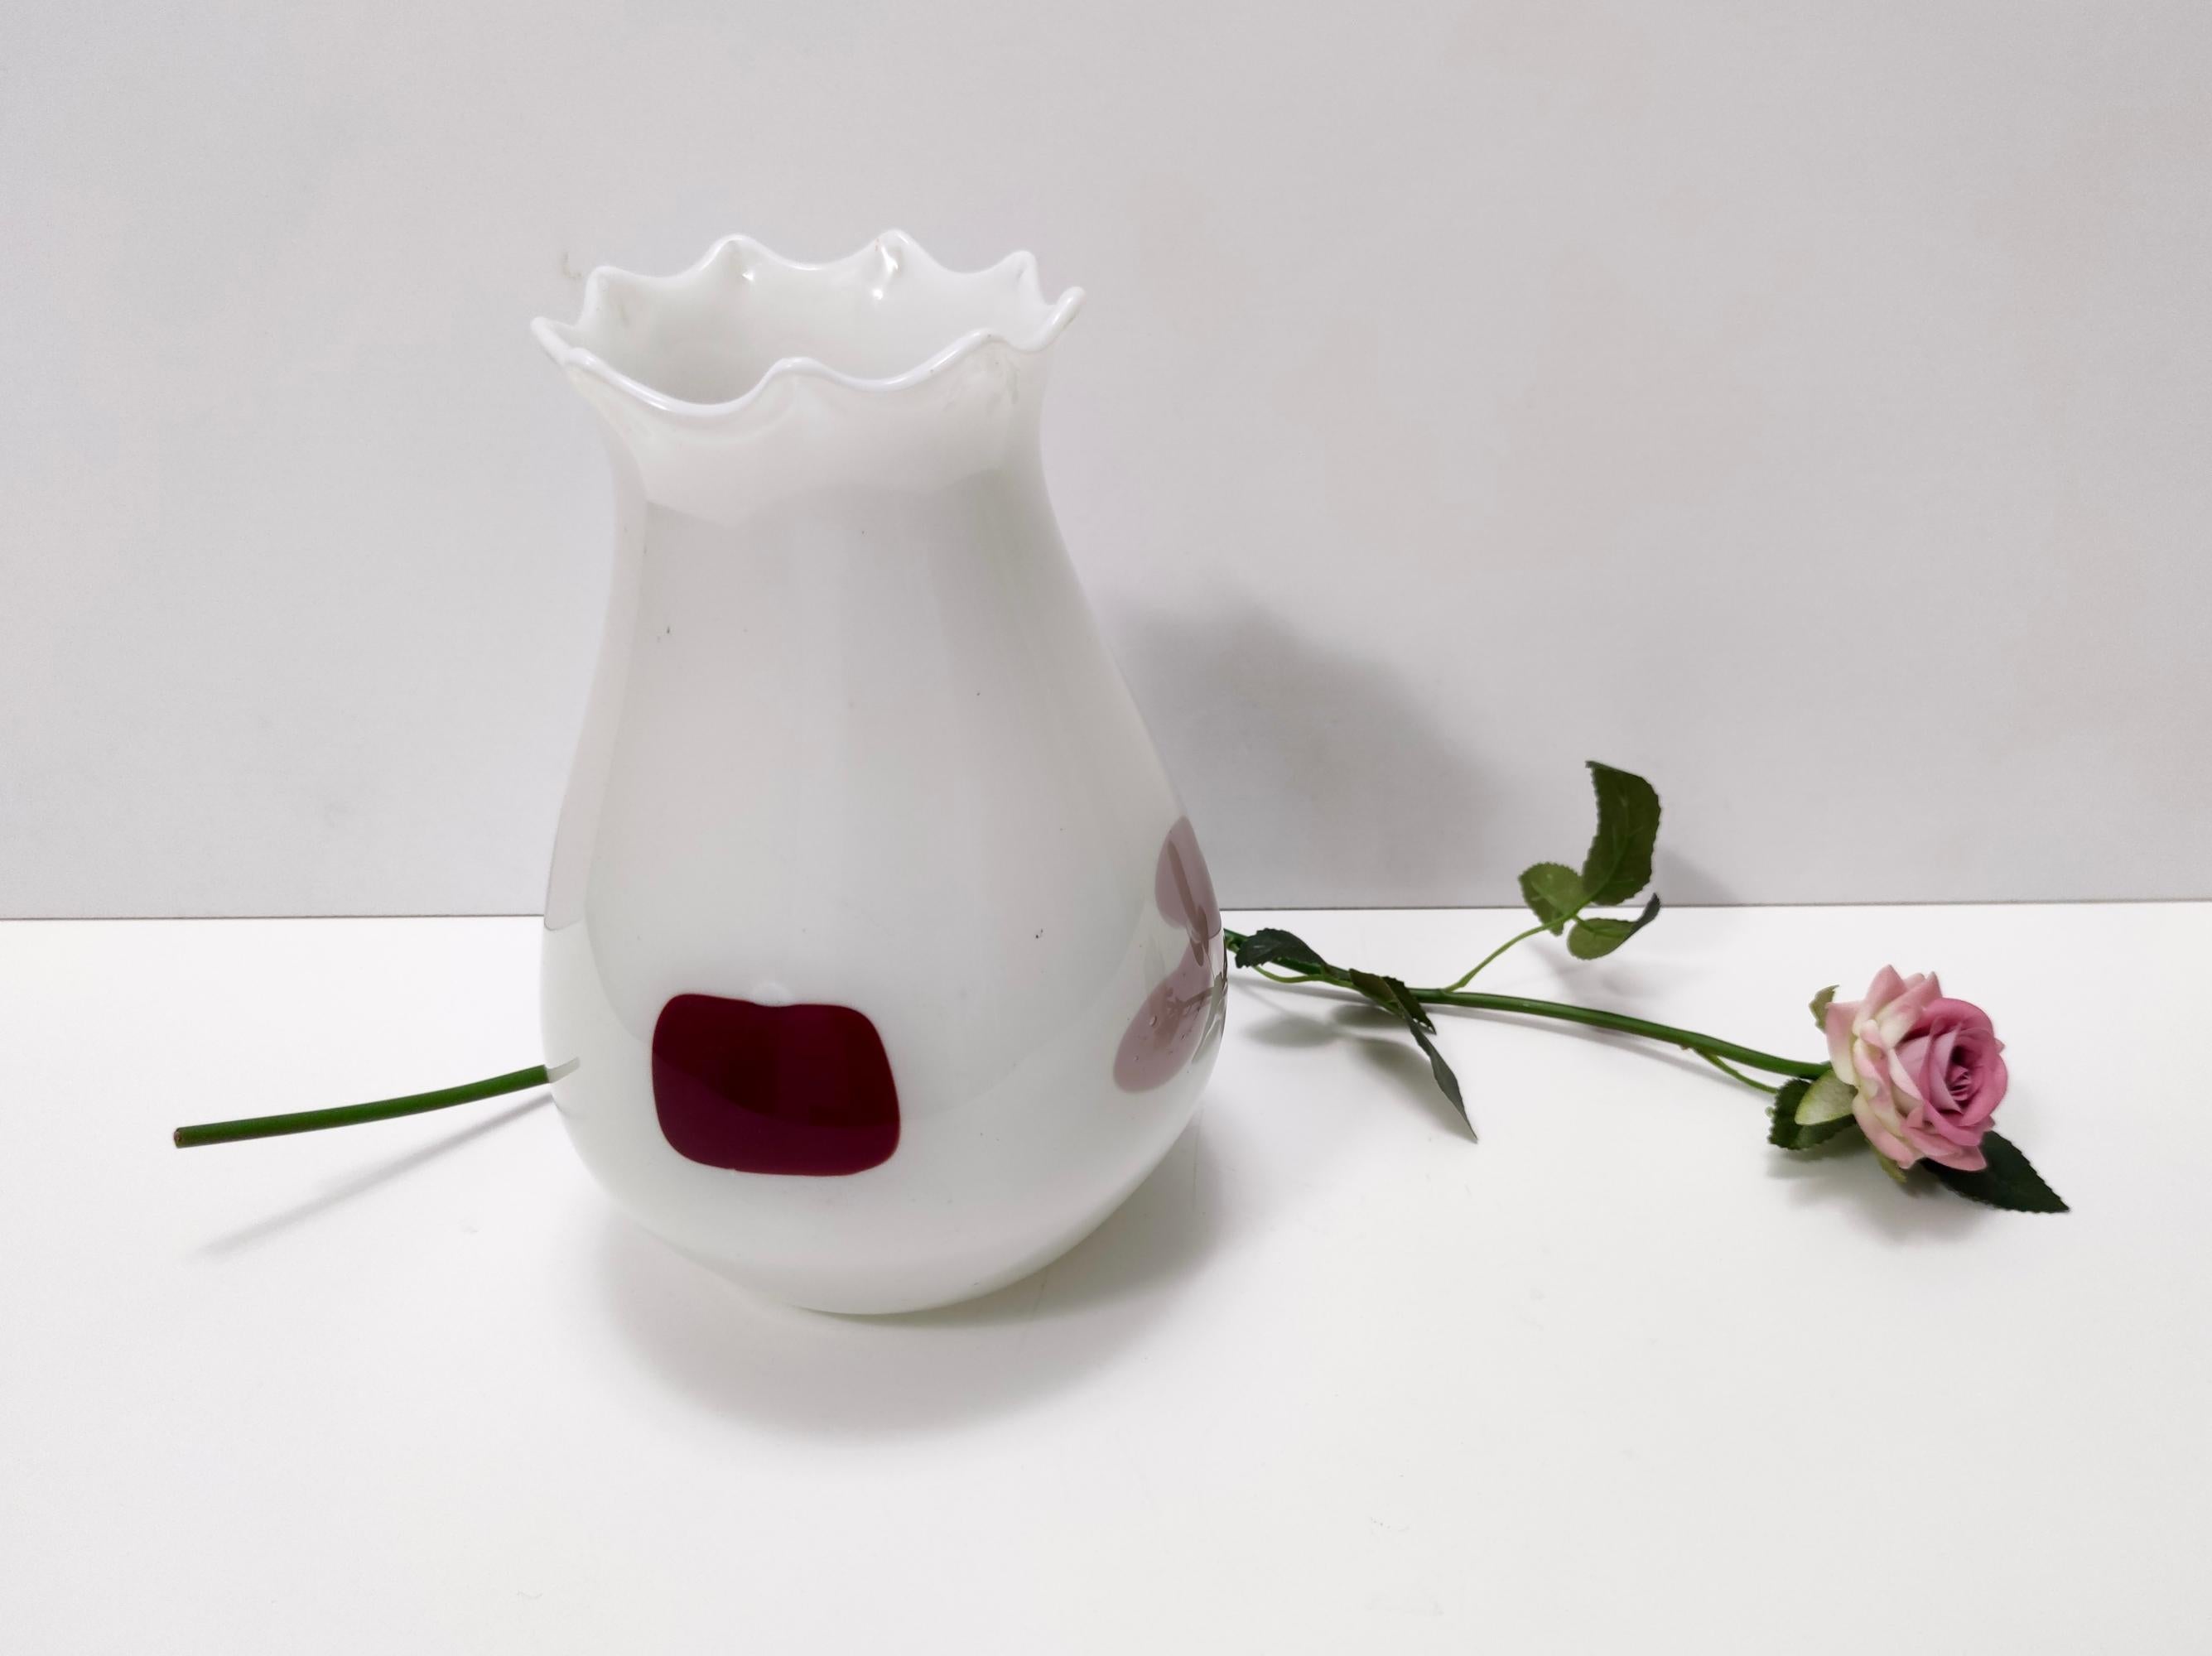 Made in Italy, 1950s. 
This white l'attimo Murano glass vase features playing card suits colored glass inserts (diamonds, clubs, hearts and spades).
It is a vintage piece, therefore it might show slight traces of use, but it can be considered as in